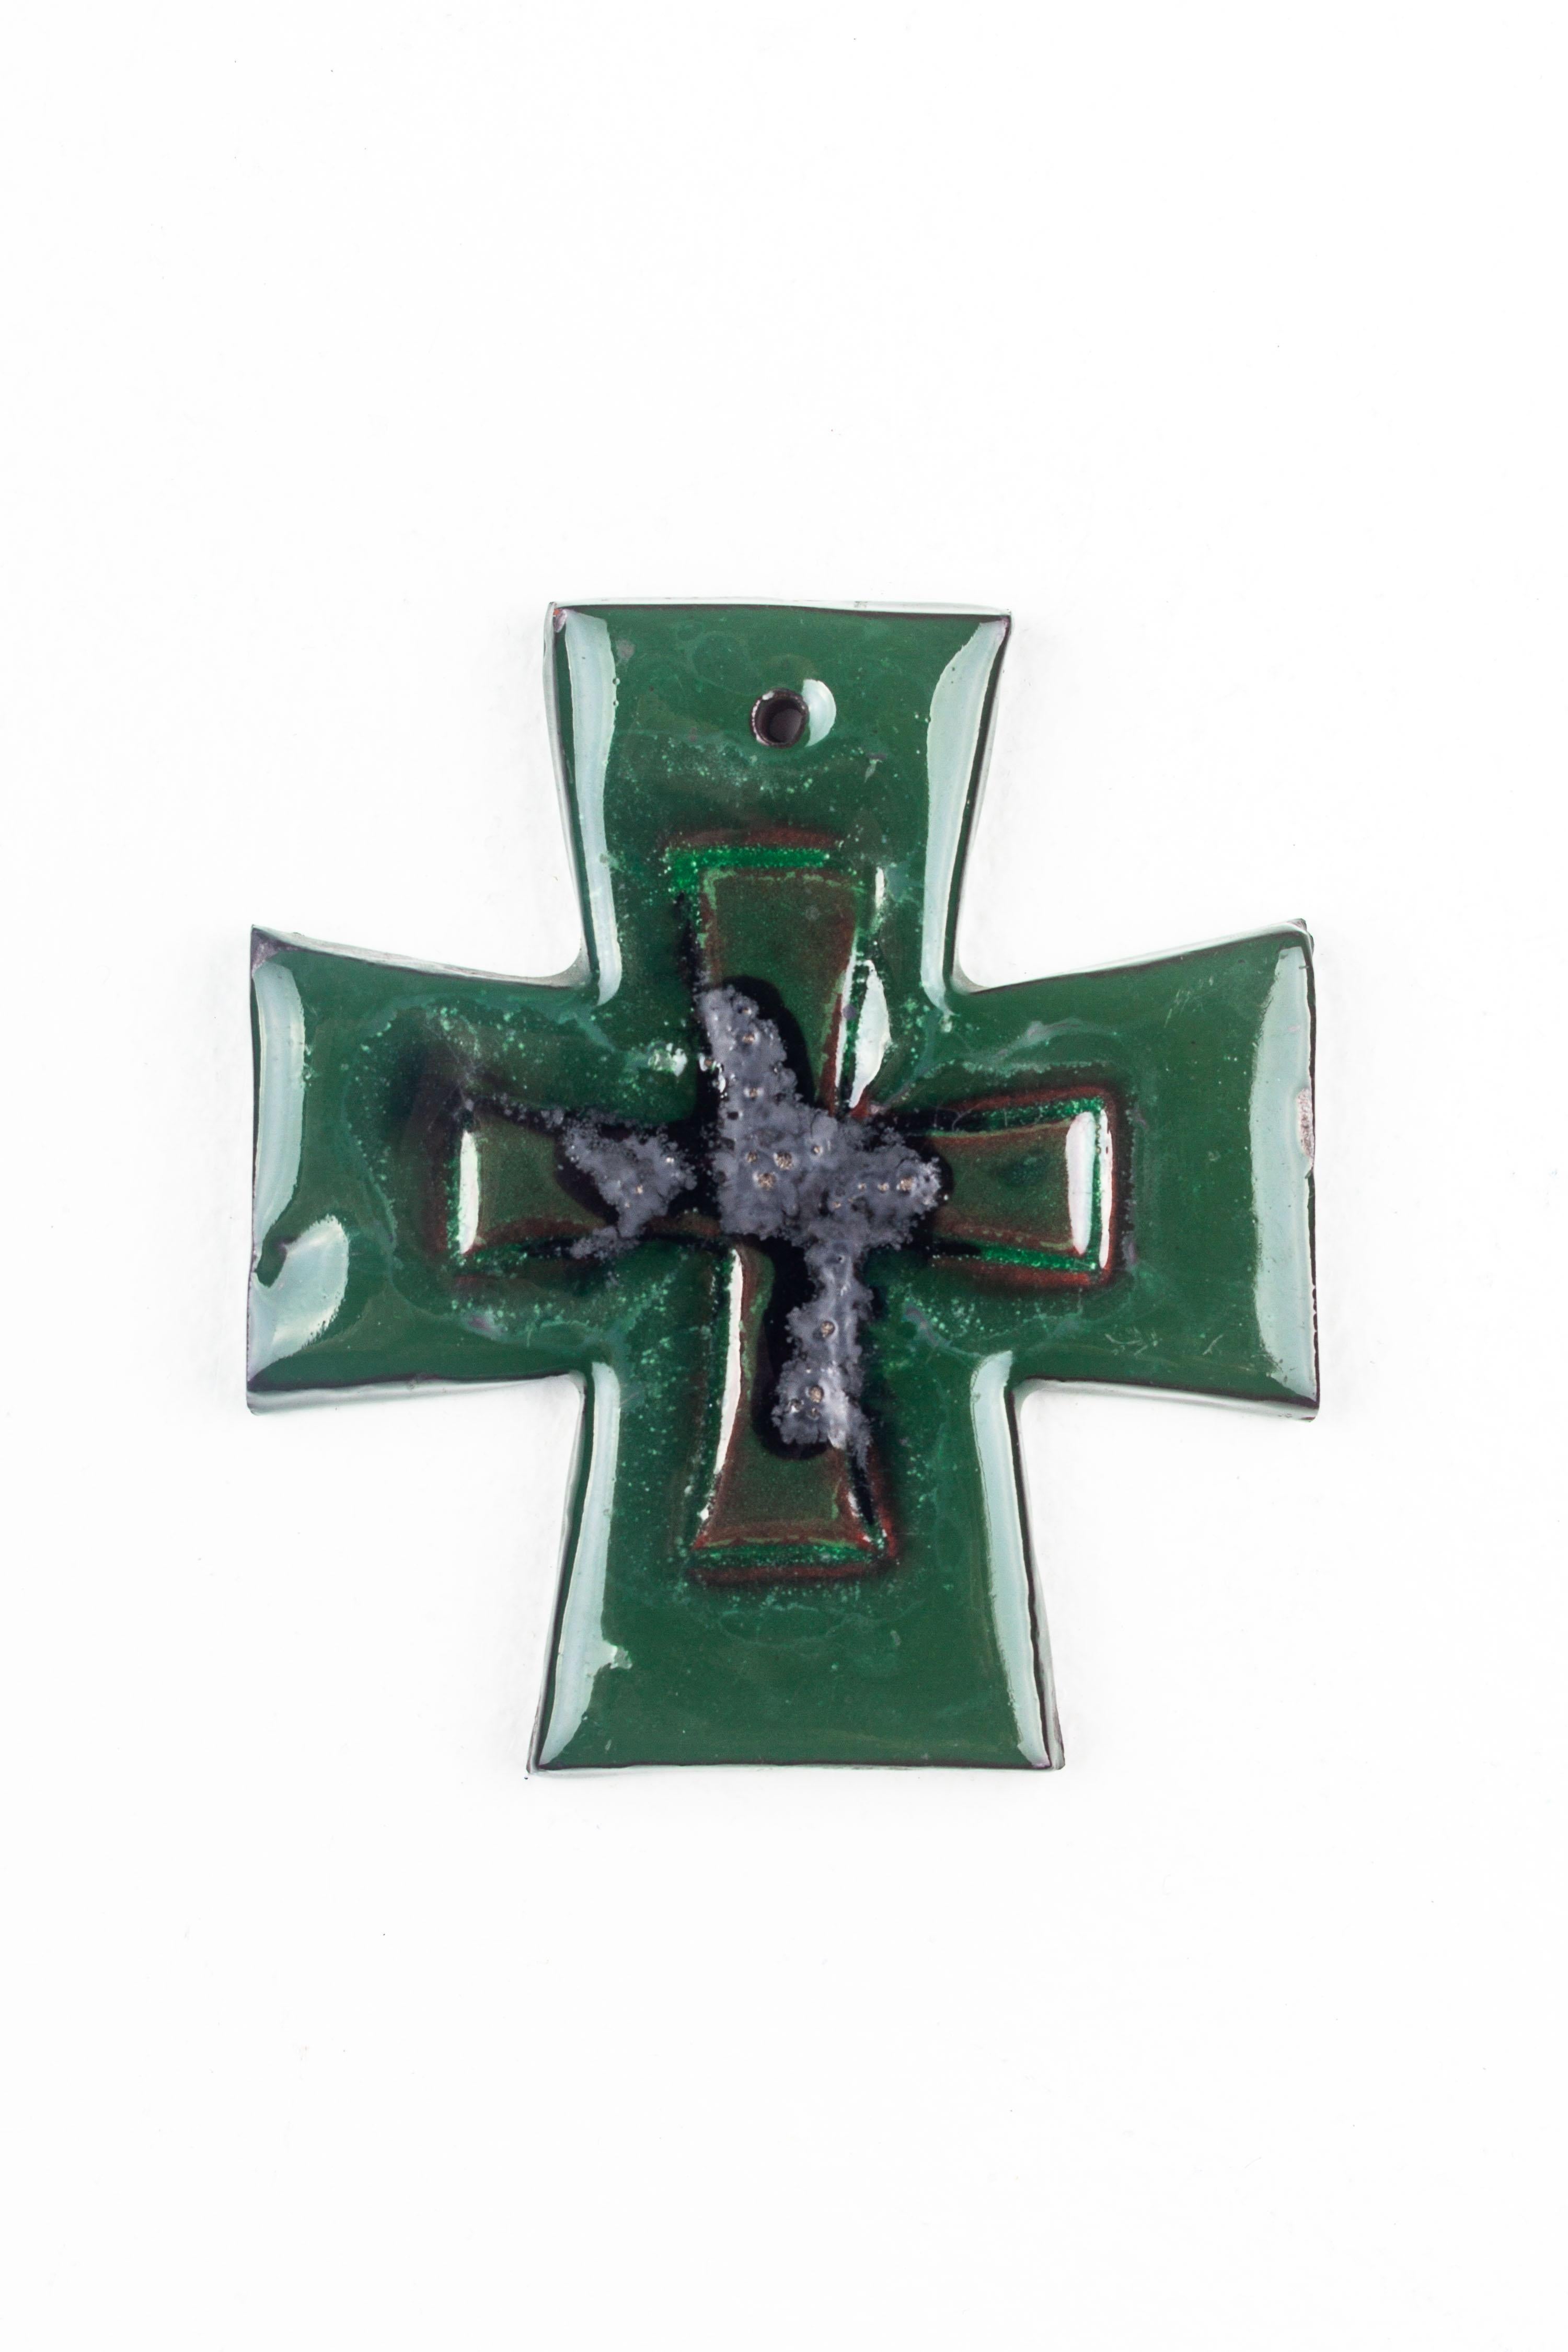 This robustly glazed ceramic Maltese cross represents the confluence of religious symbolism and mid-century modern aesthetics, crafted by the hands of European studio pottery artists. The cross is characterized by its equilateral arms and a deep,